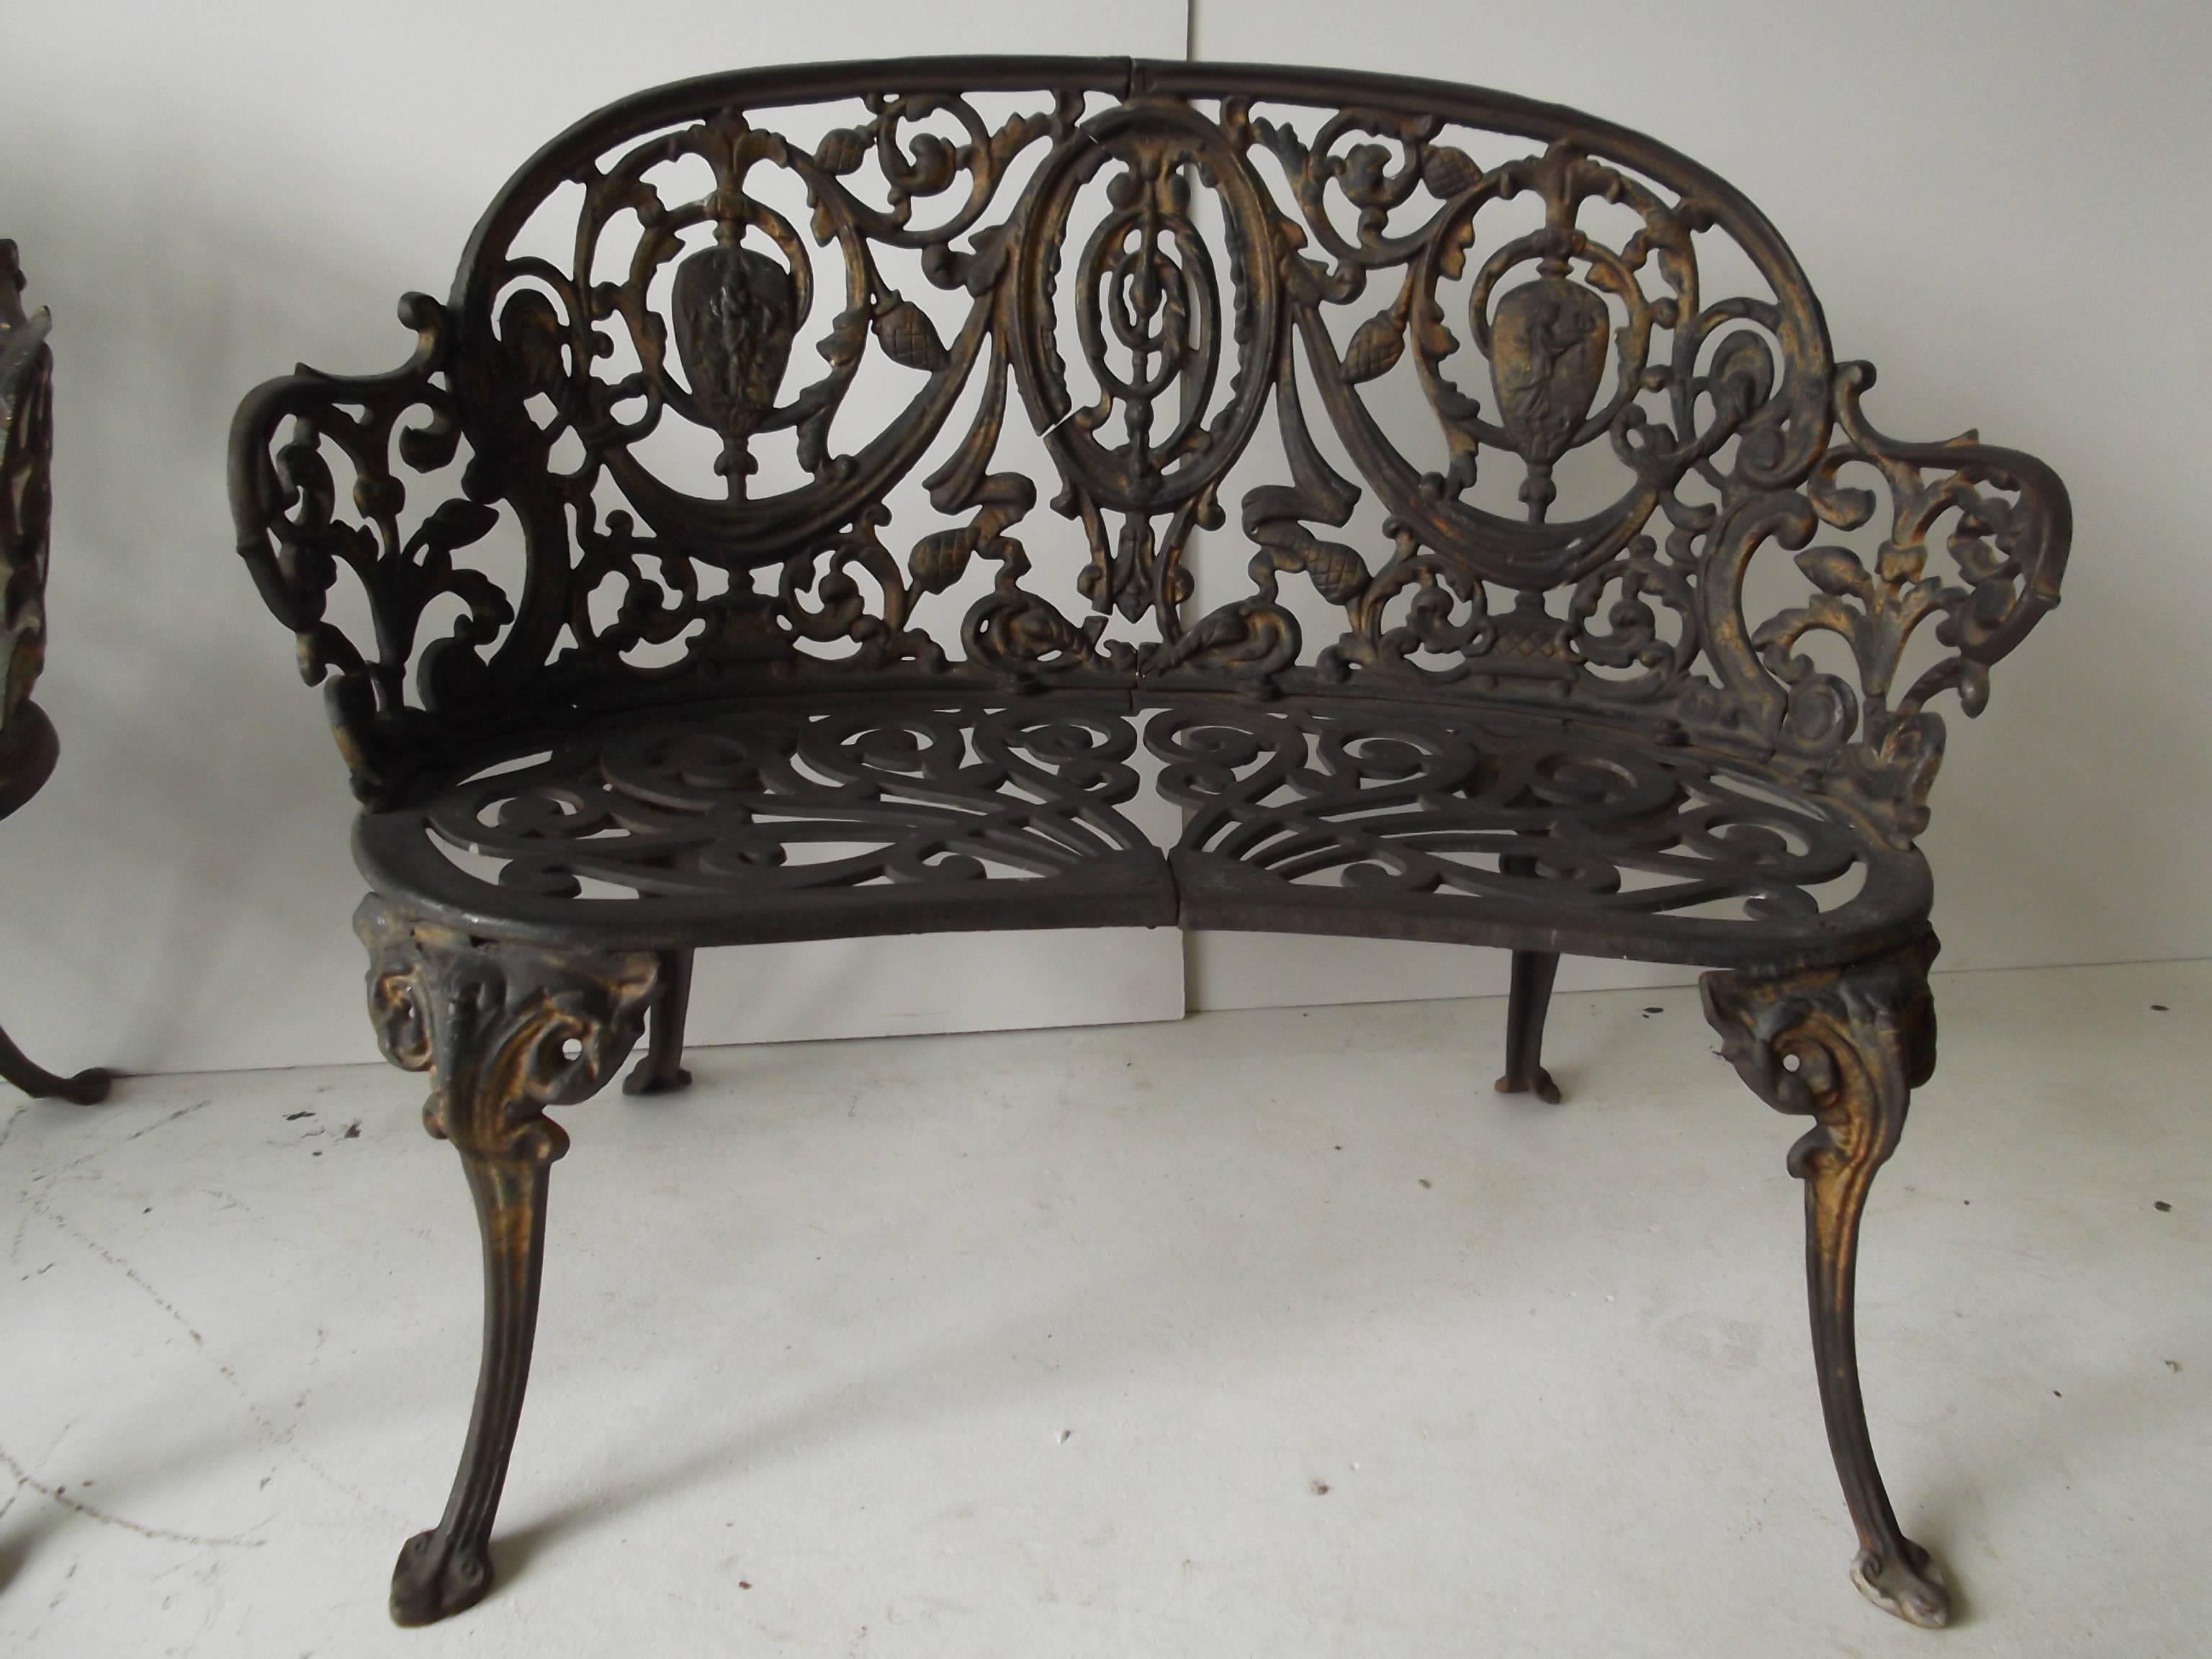 Neoclassical Revival Pair of Antique Ornate Cast Iron Diminutive Garden Bench Seats